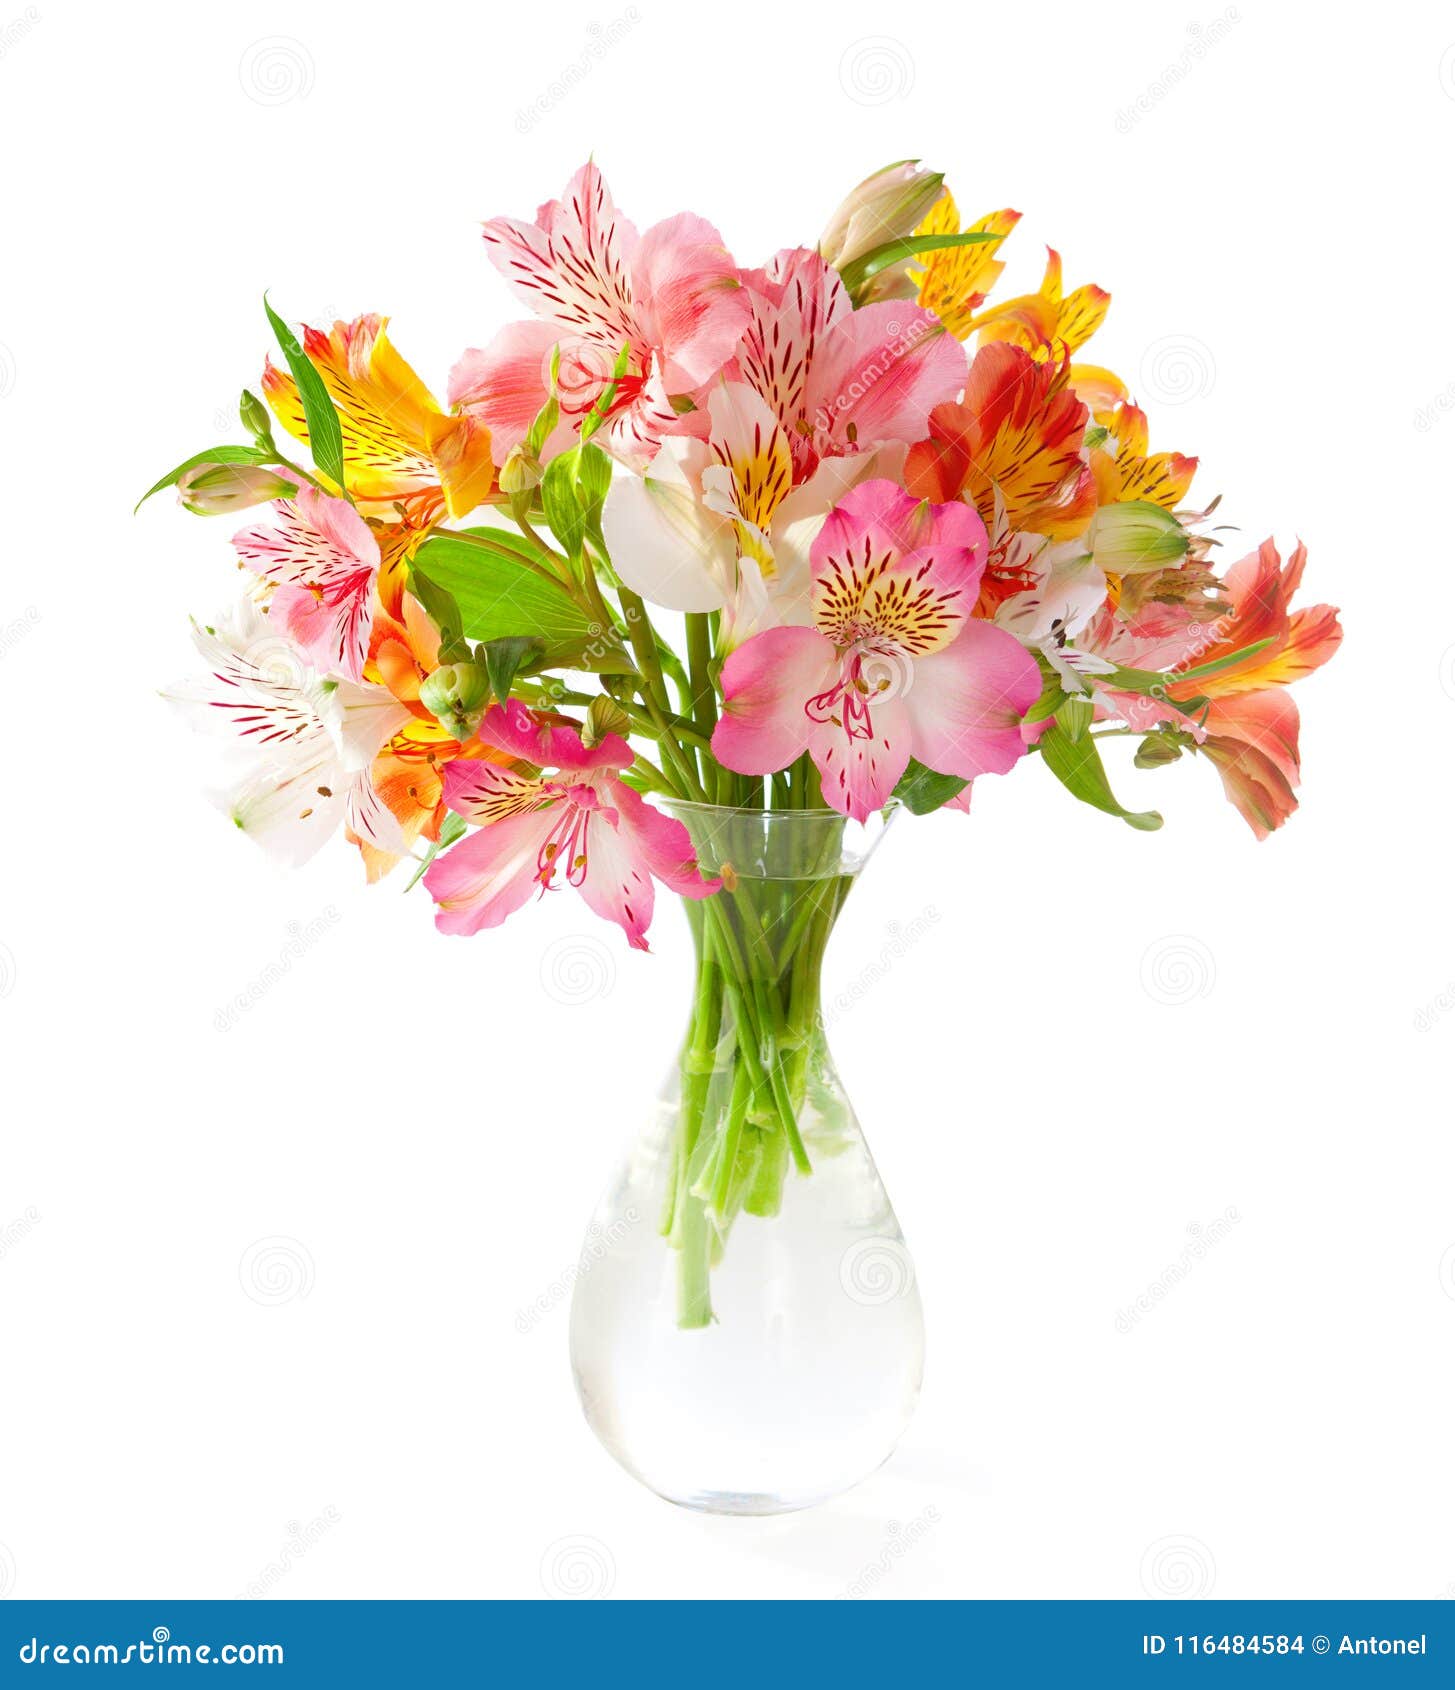 bouquet of colorful alstroemeria flowers in a transparent glass vase  on white background